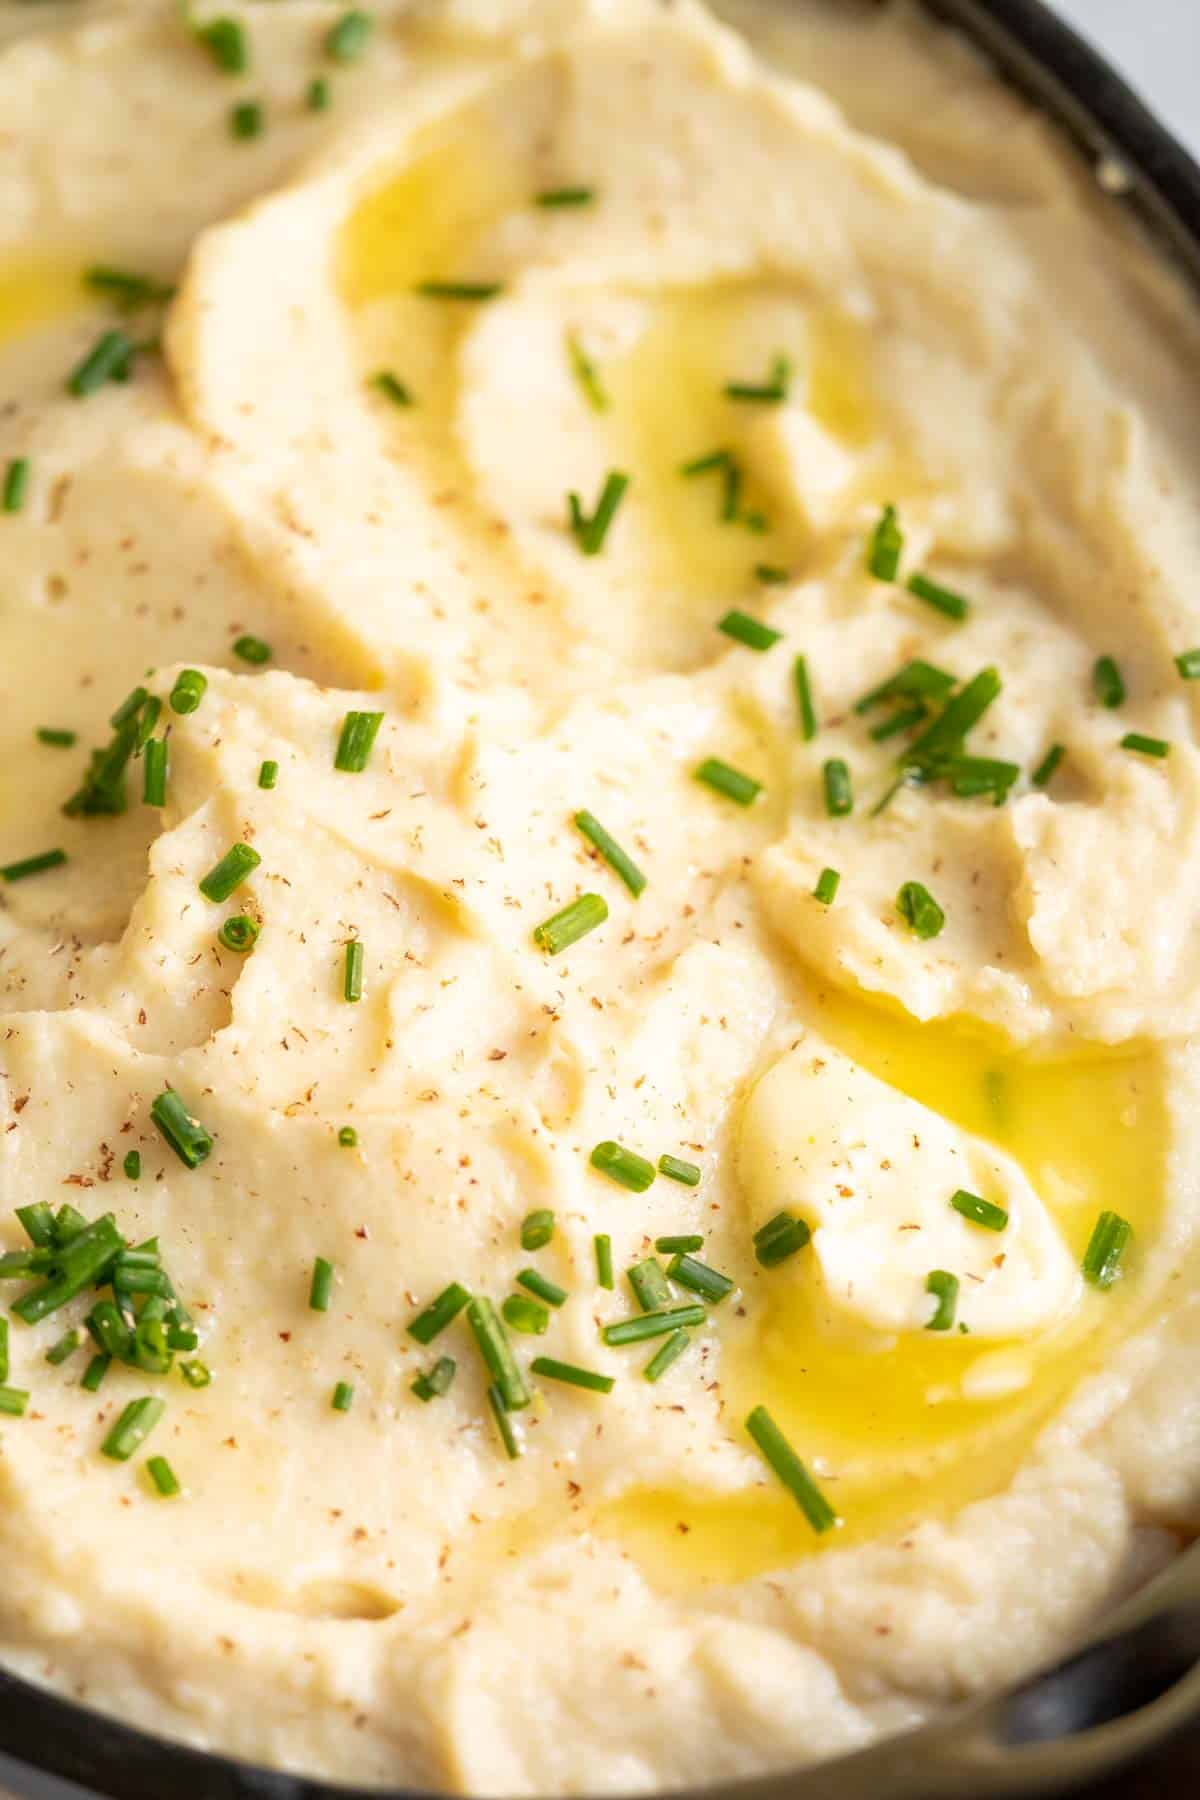 Celeriac puree in a bowl with butter and chives.